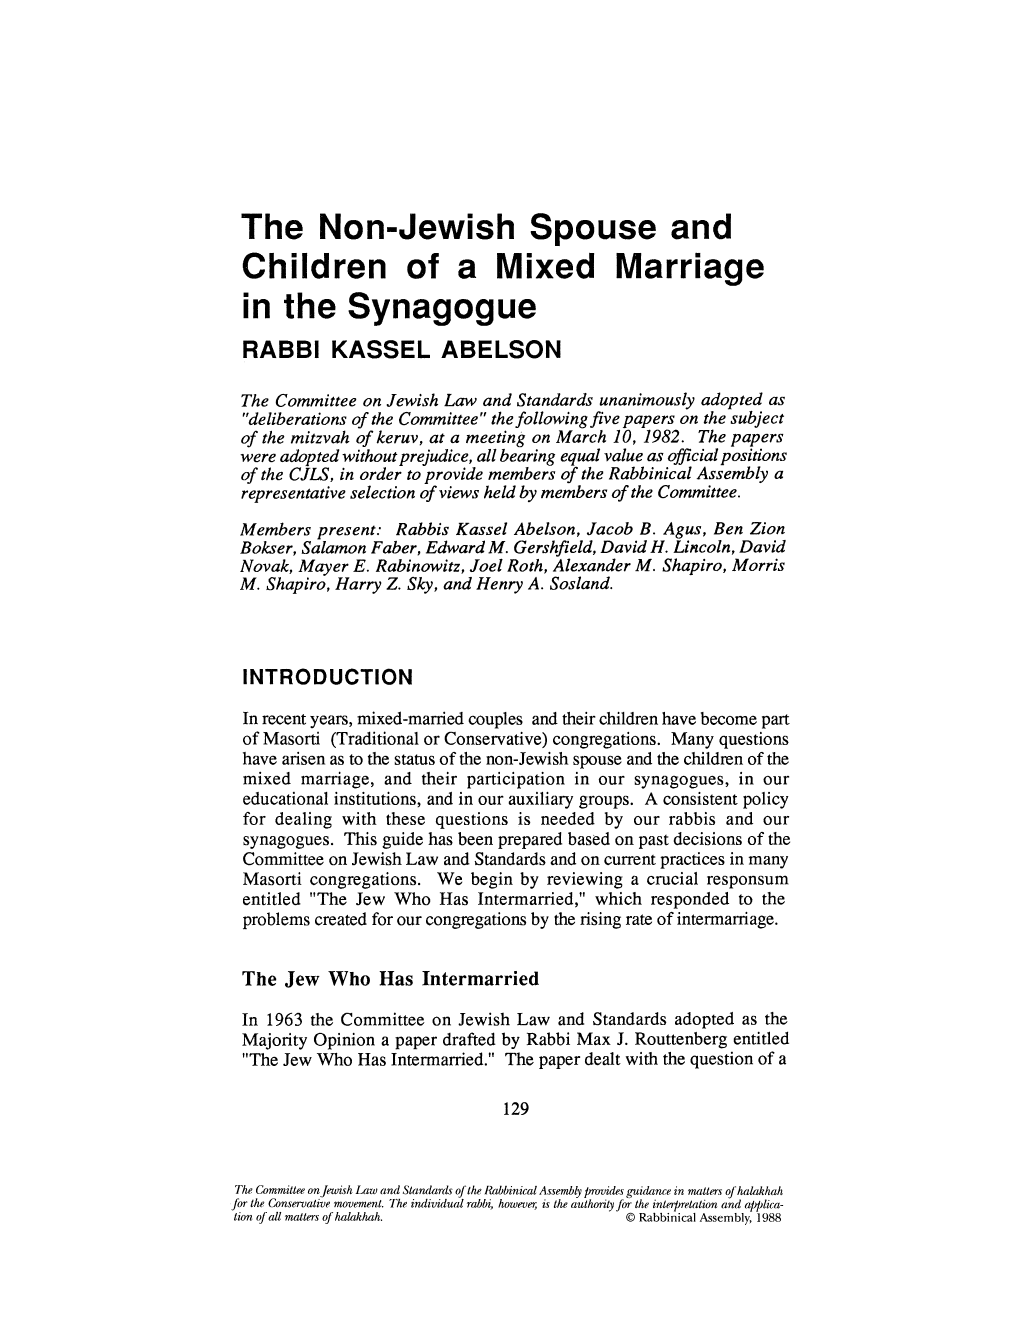 The Non-Jewish Spouse and Children of a Mixed Marriage in the Synagogue RABBI KASSEL ABELSON